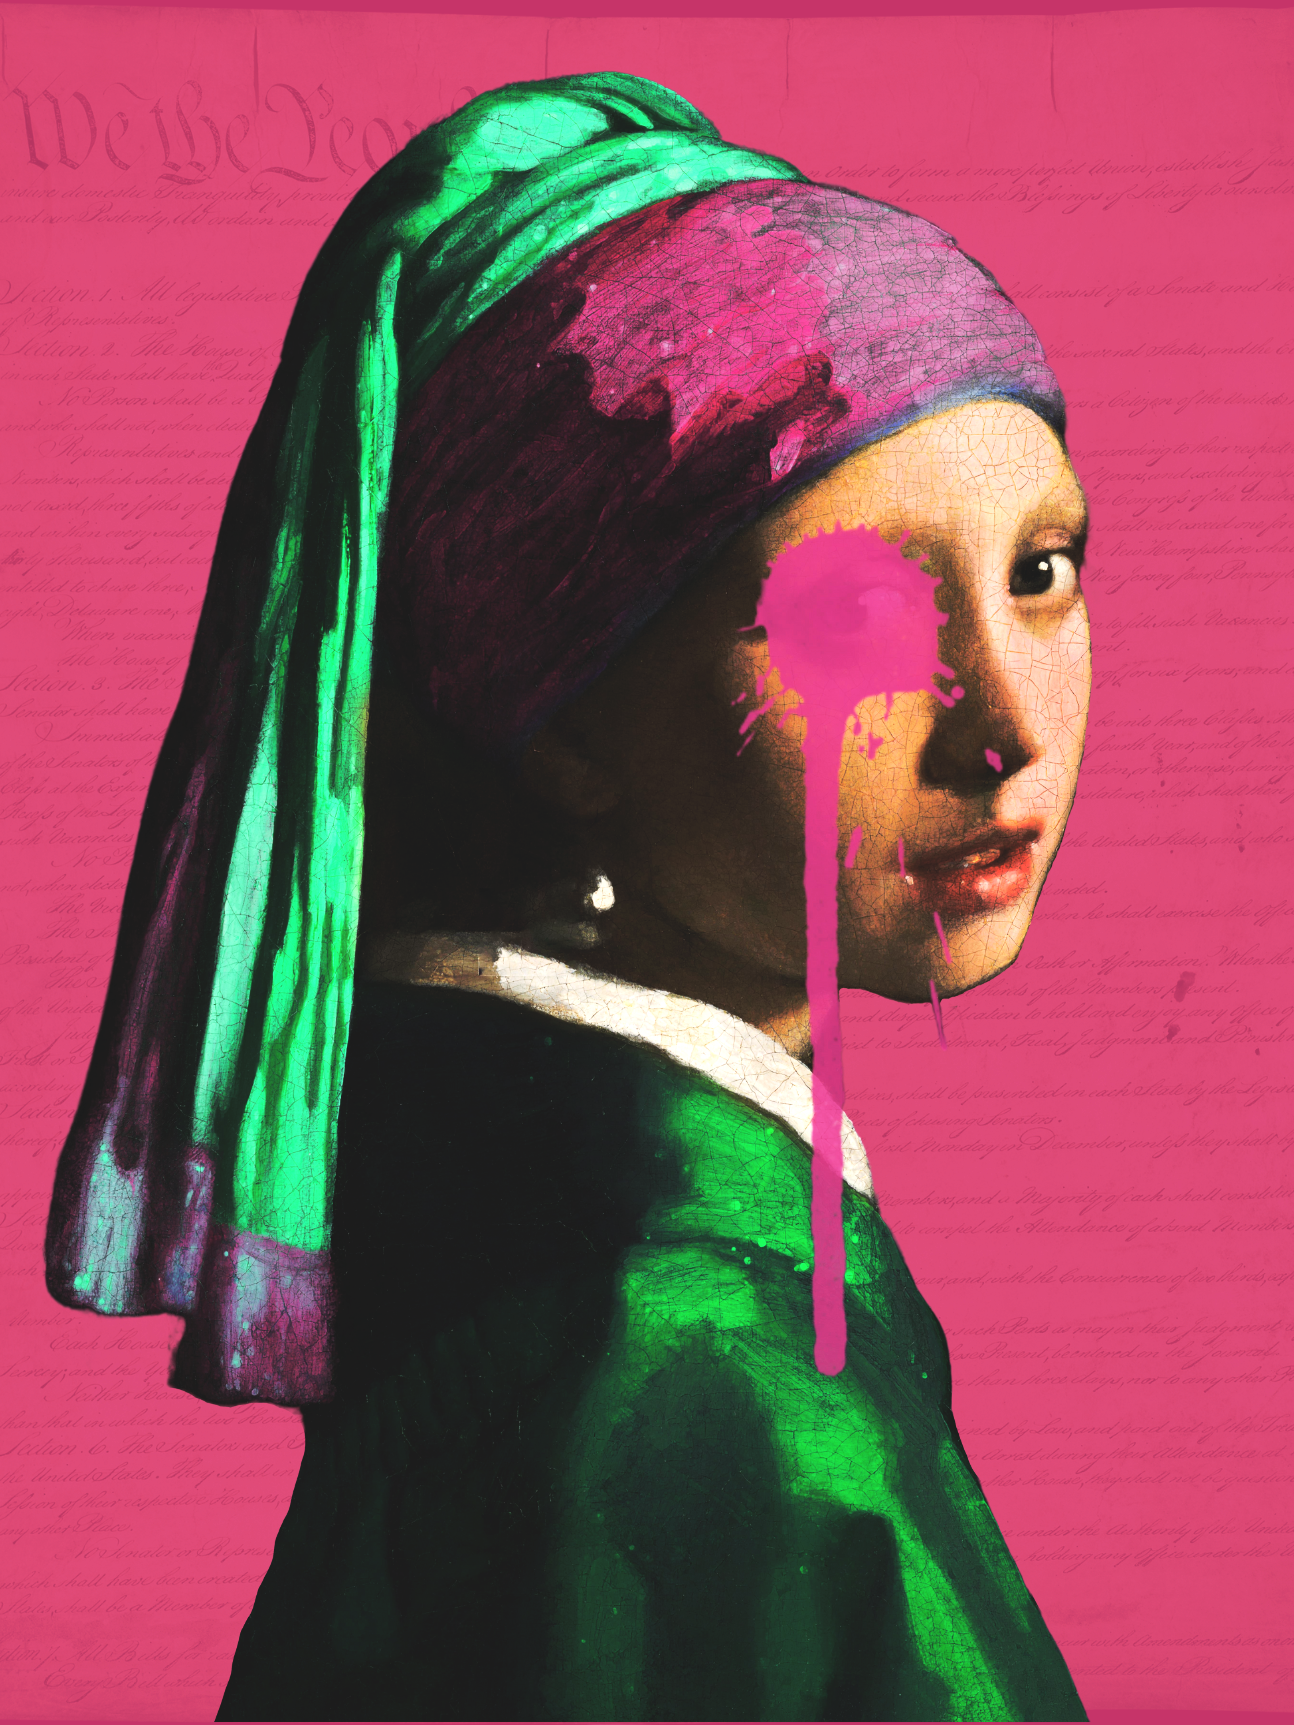 The Girl With the Pearl Earring Altered